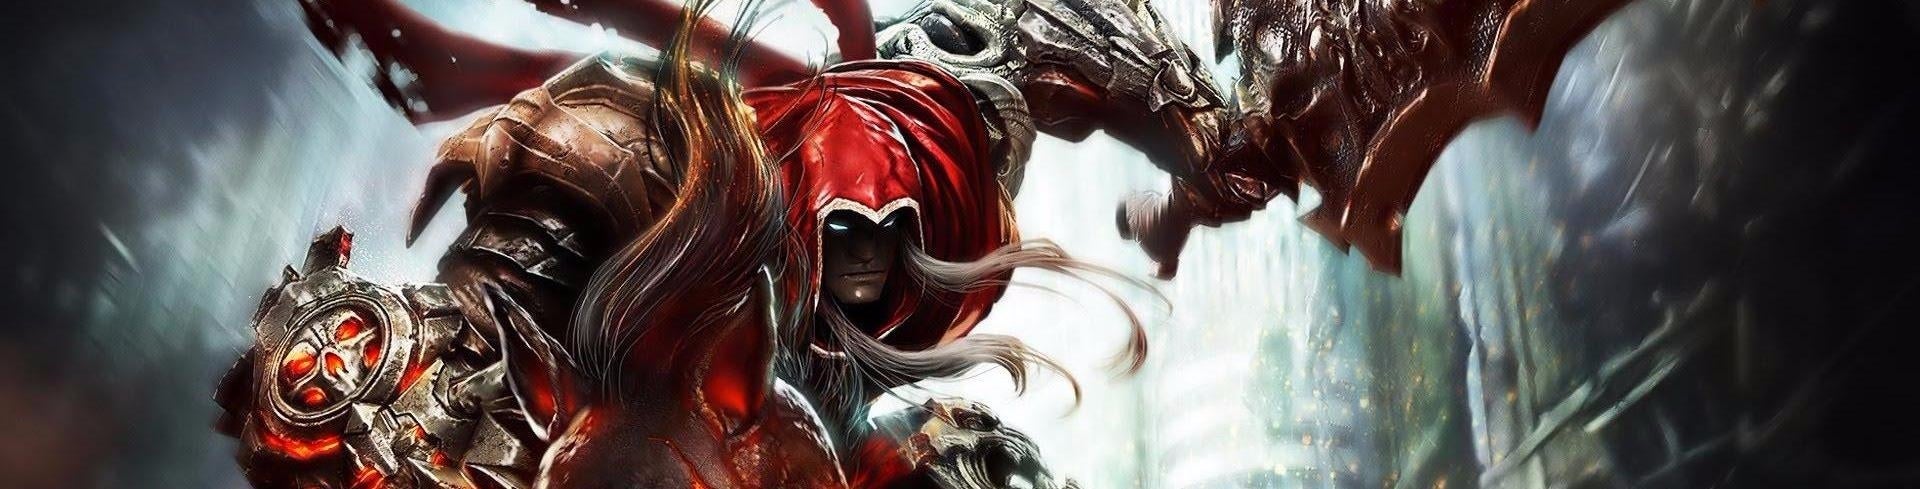 Image for Watch: Johnny plays Darksiders for the first time, gets the horn